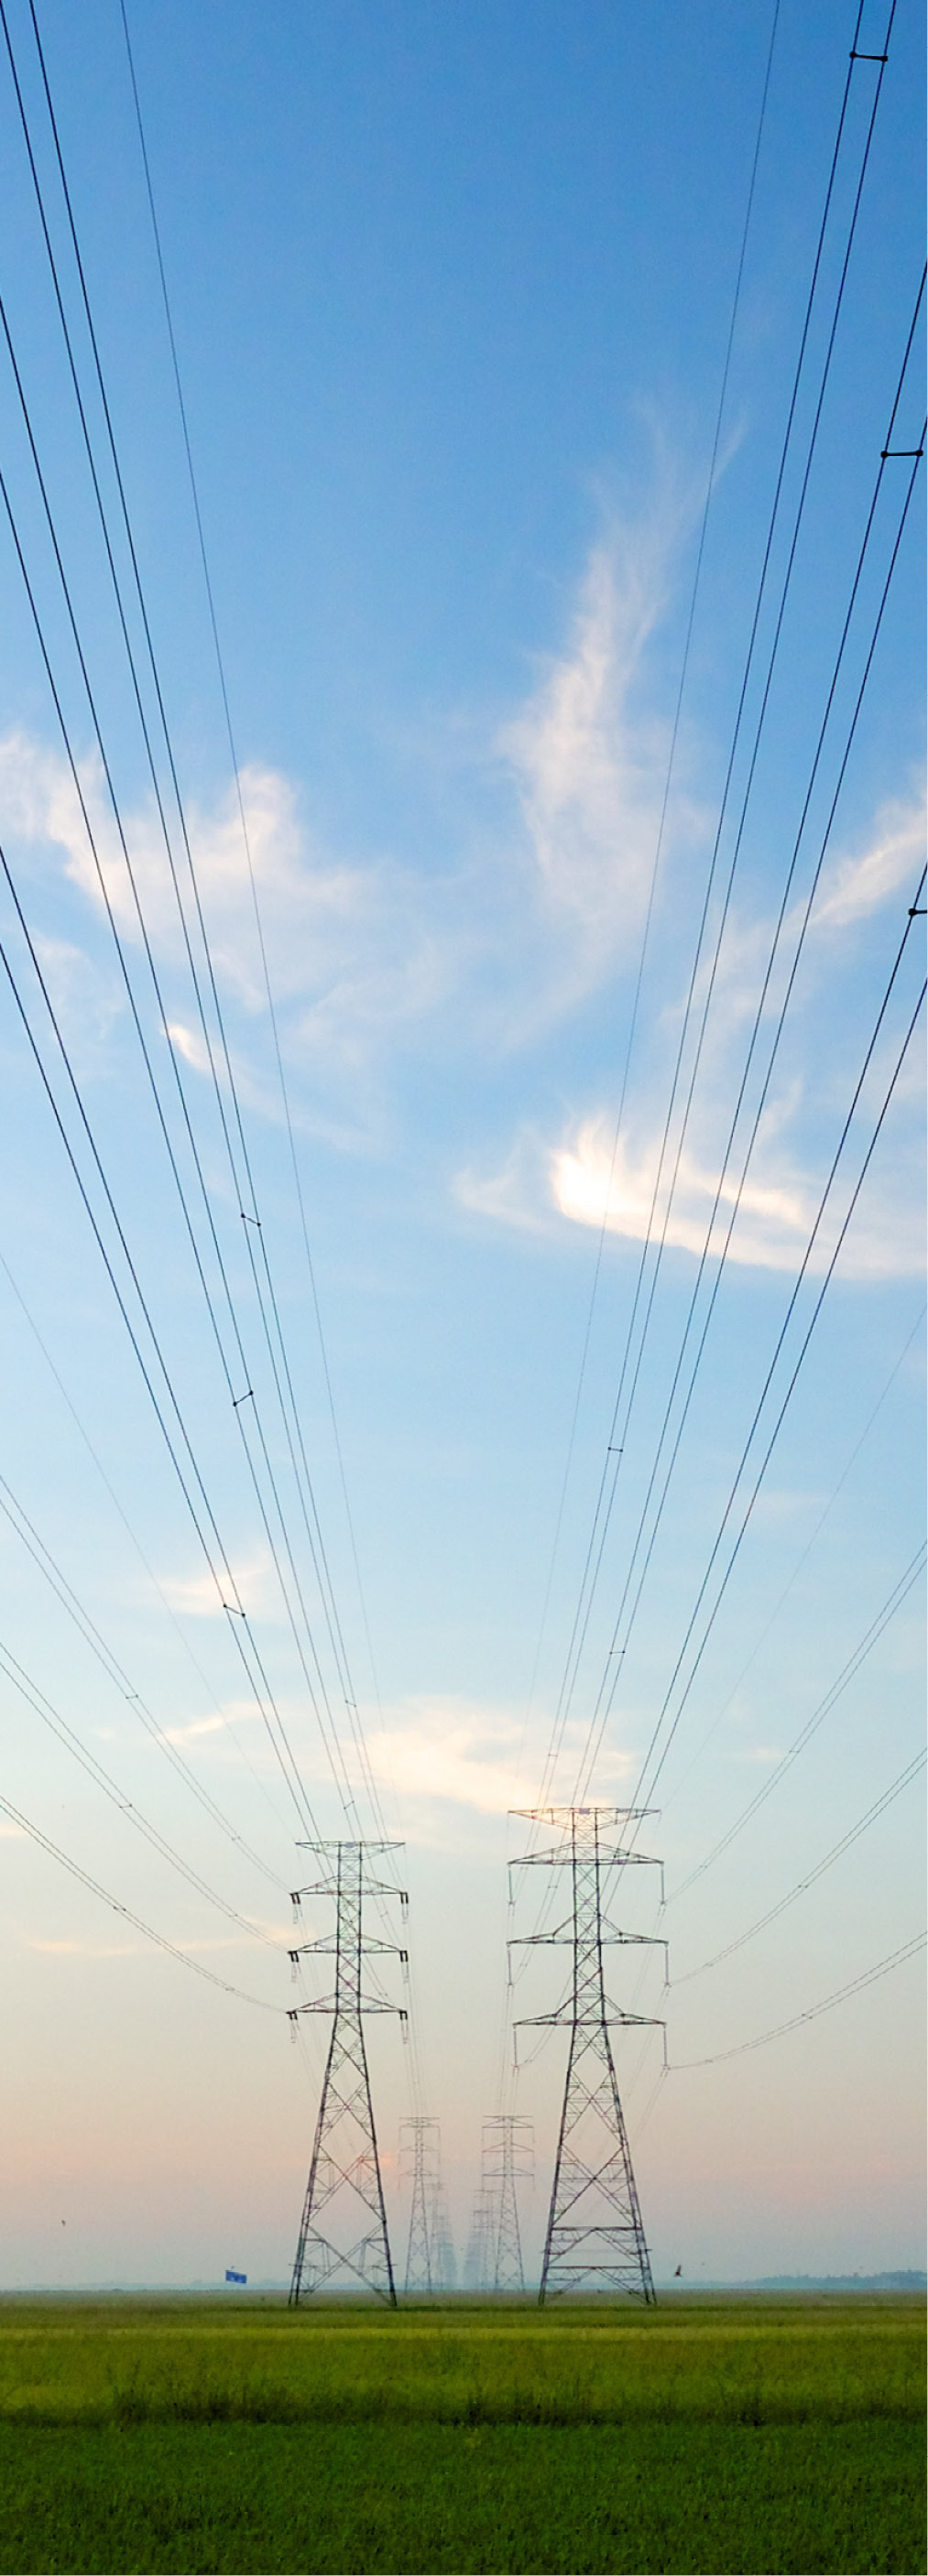 Power transmission lines fade out into the distance on a semi cloudy day.